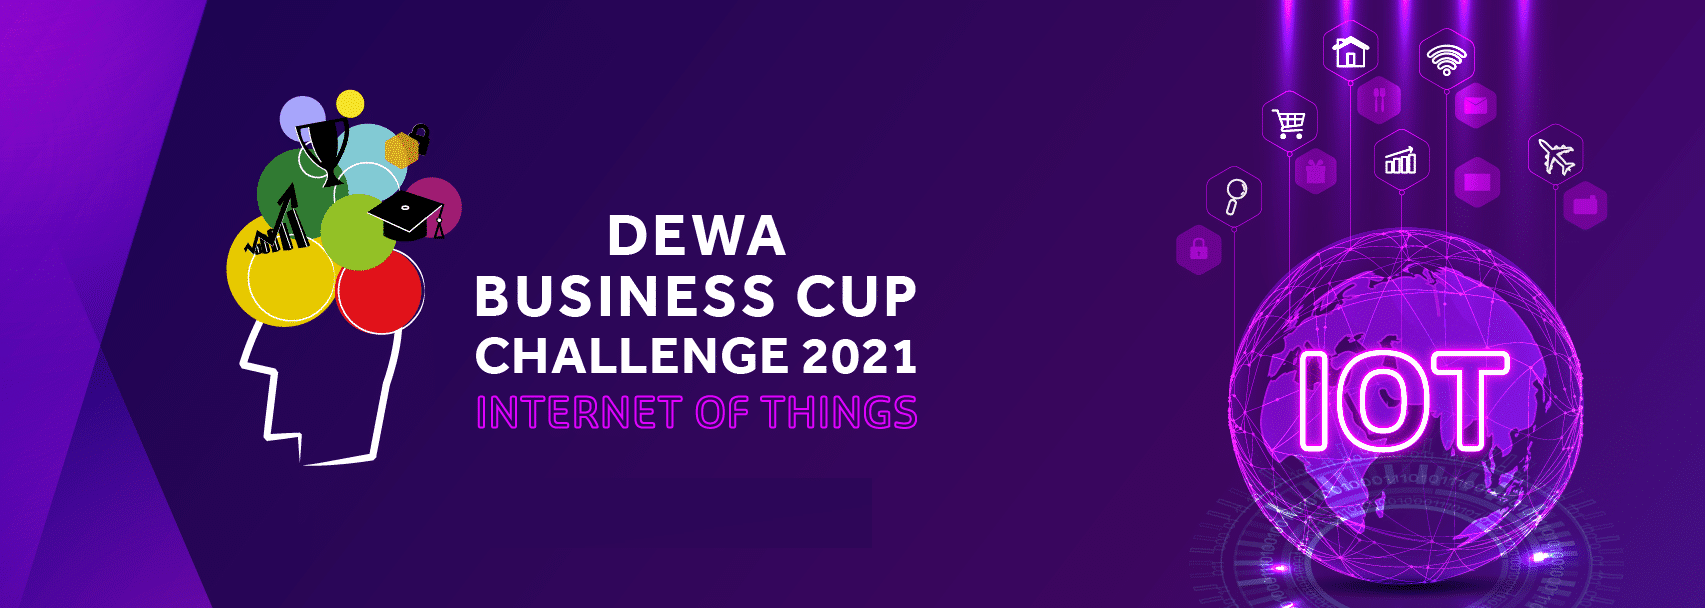 Image for Highschool and University students shine at DEWA Business Cup Challenge 2021